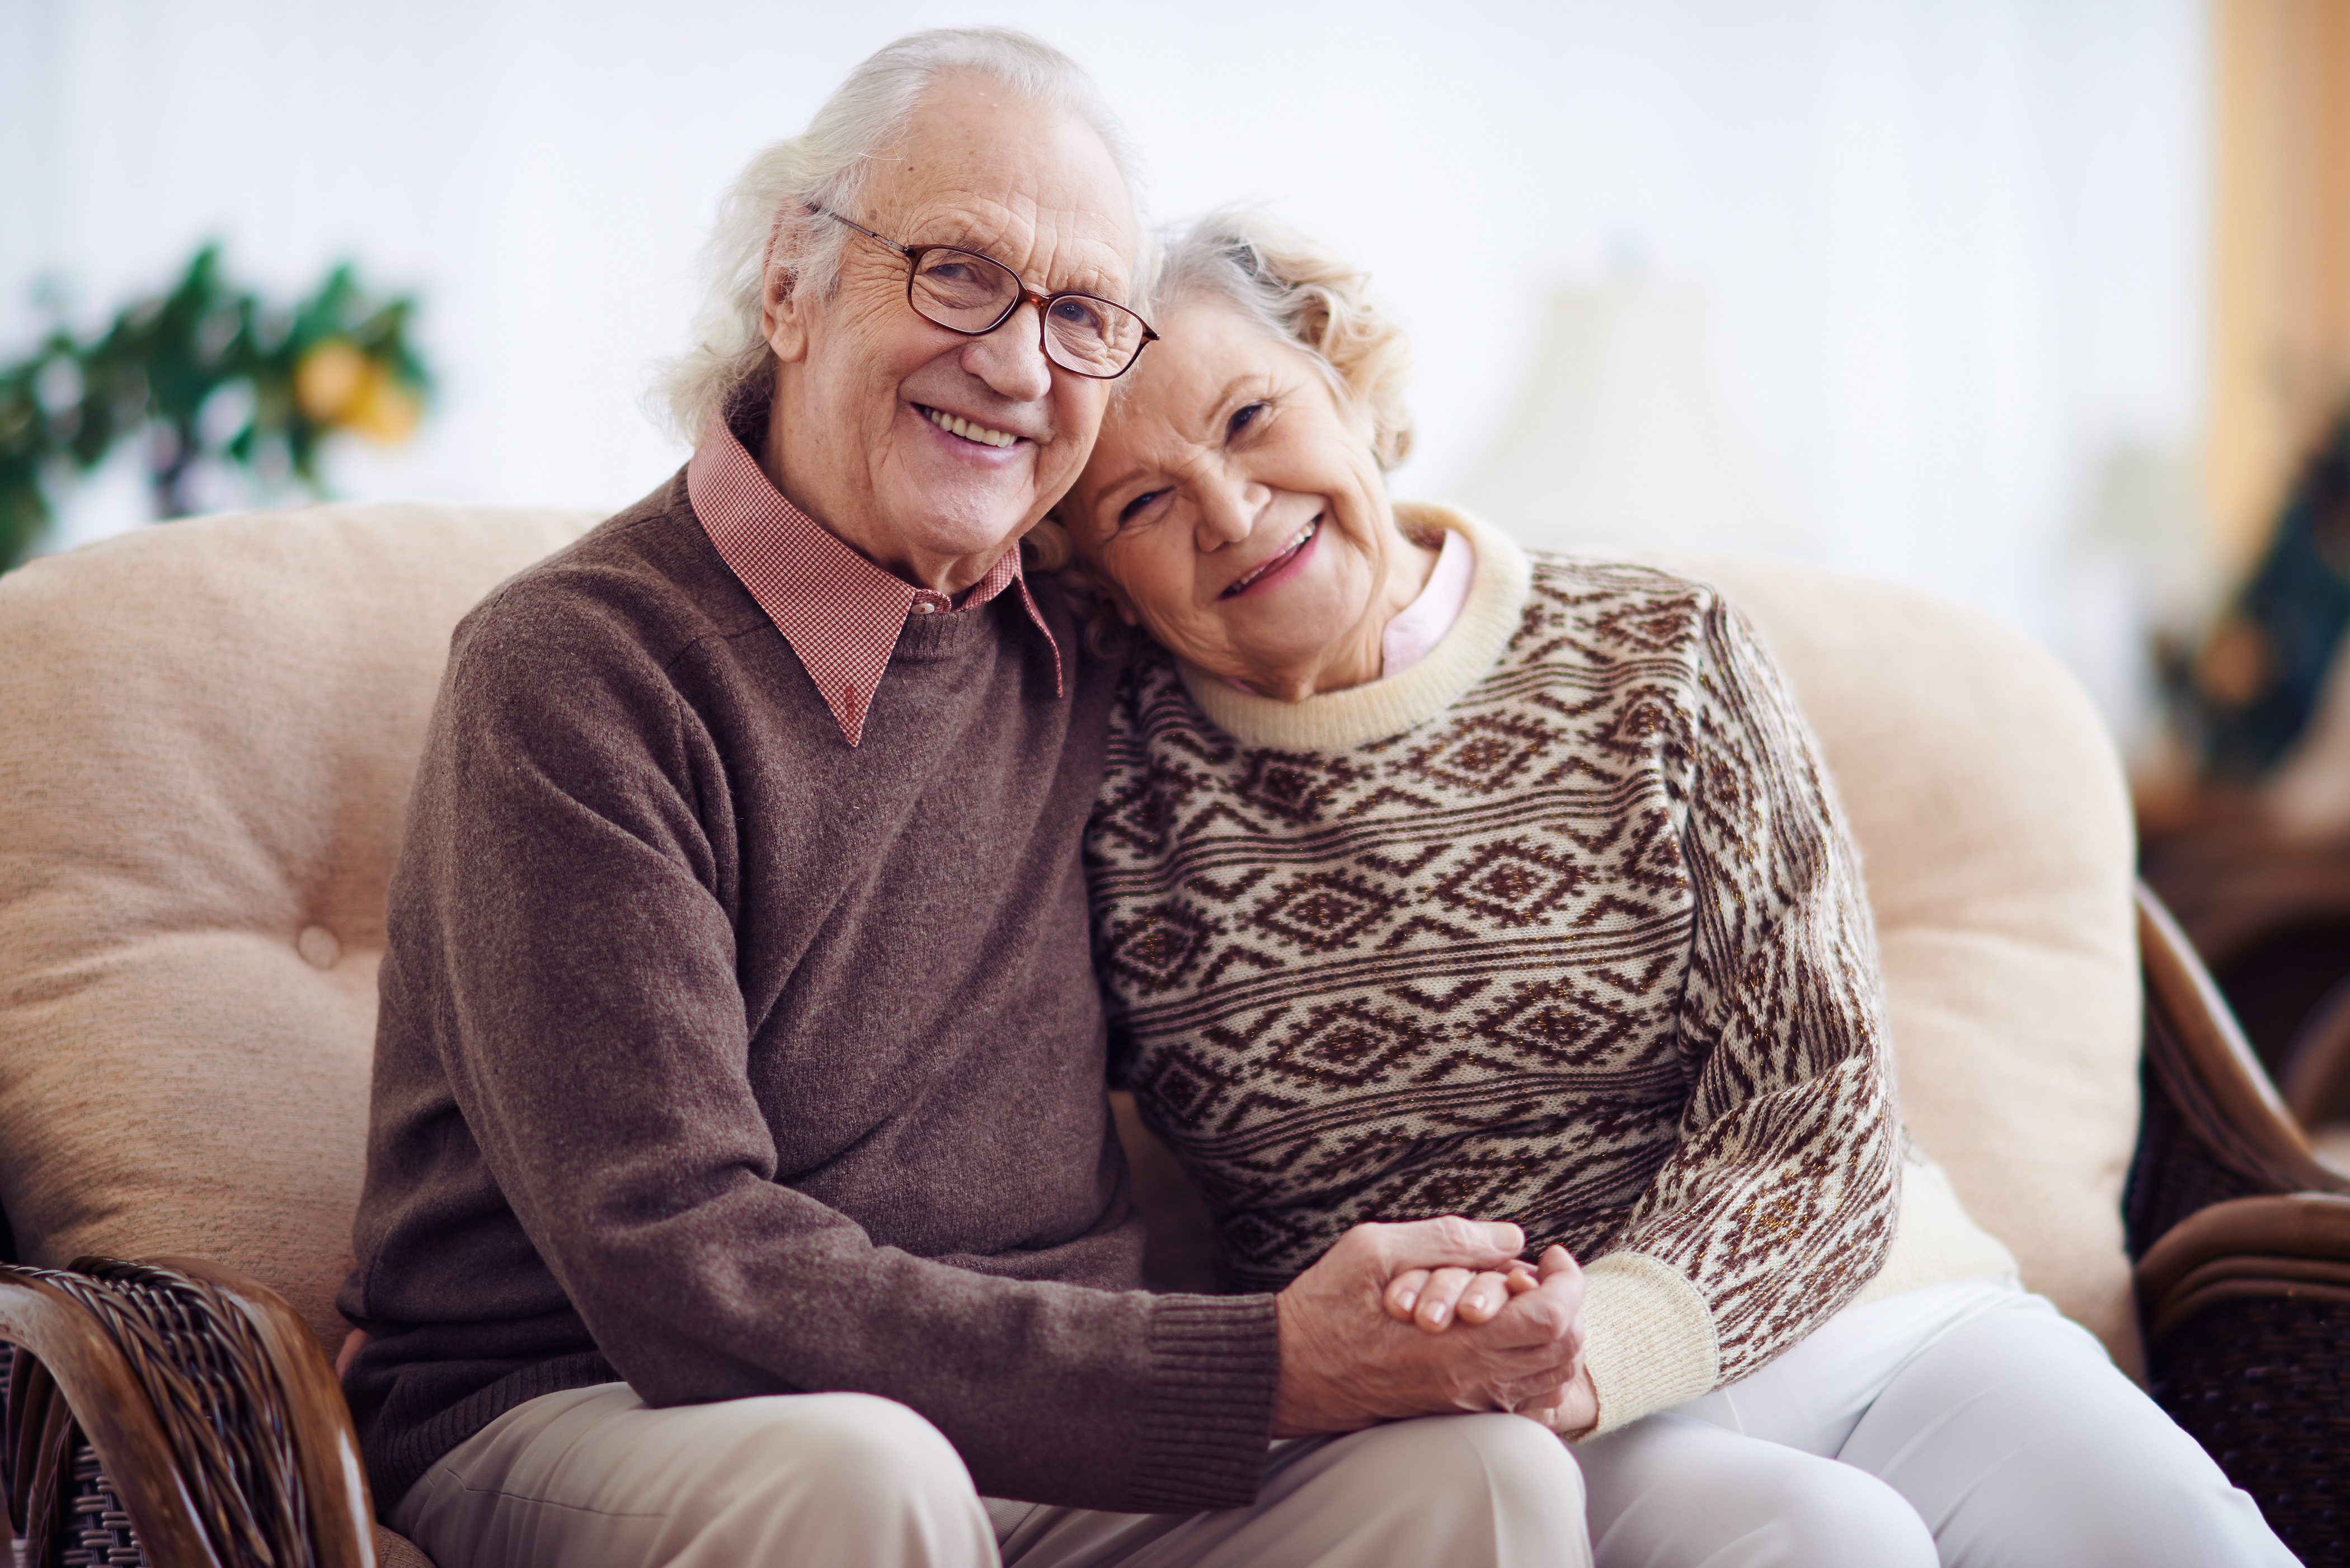 An older couple sitting on a couch | Source: Shutterstock